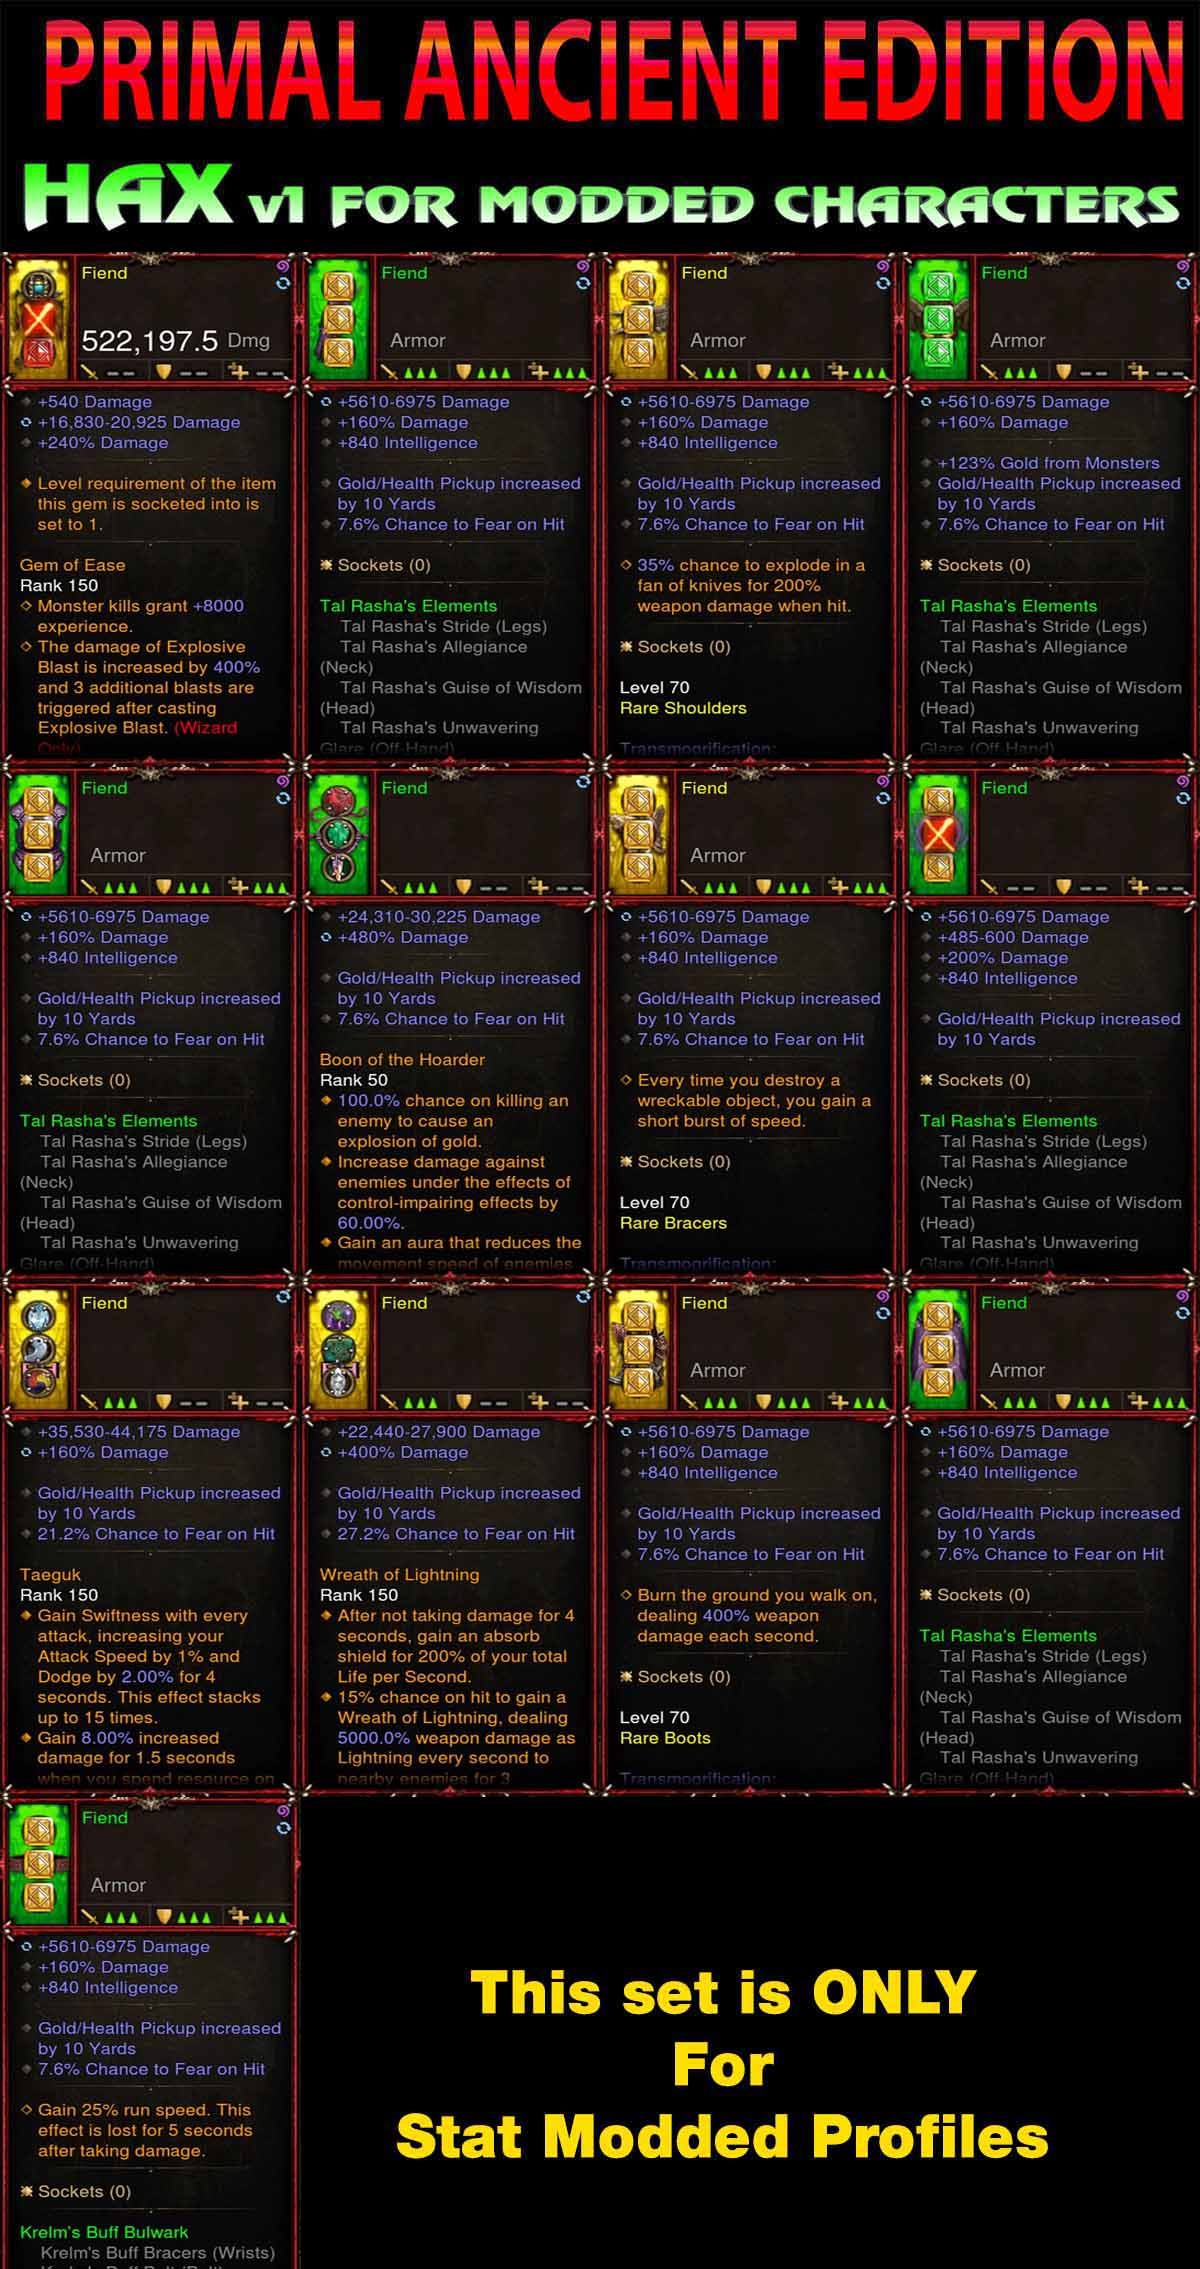 [Primal Ancient] [Quad DPS] Hax v1 Tal Rasha Wizard set Fiend, PickUp Radius Diablo 3 Mods ROS Seasonal and Non Seasonal Save Mod - Modded Items and Gear - Hacks - Cheats - Trainers for Playstation 4 - Playstation 5 - Nintendo Switch - Xbox One